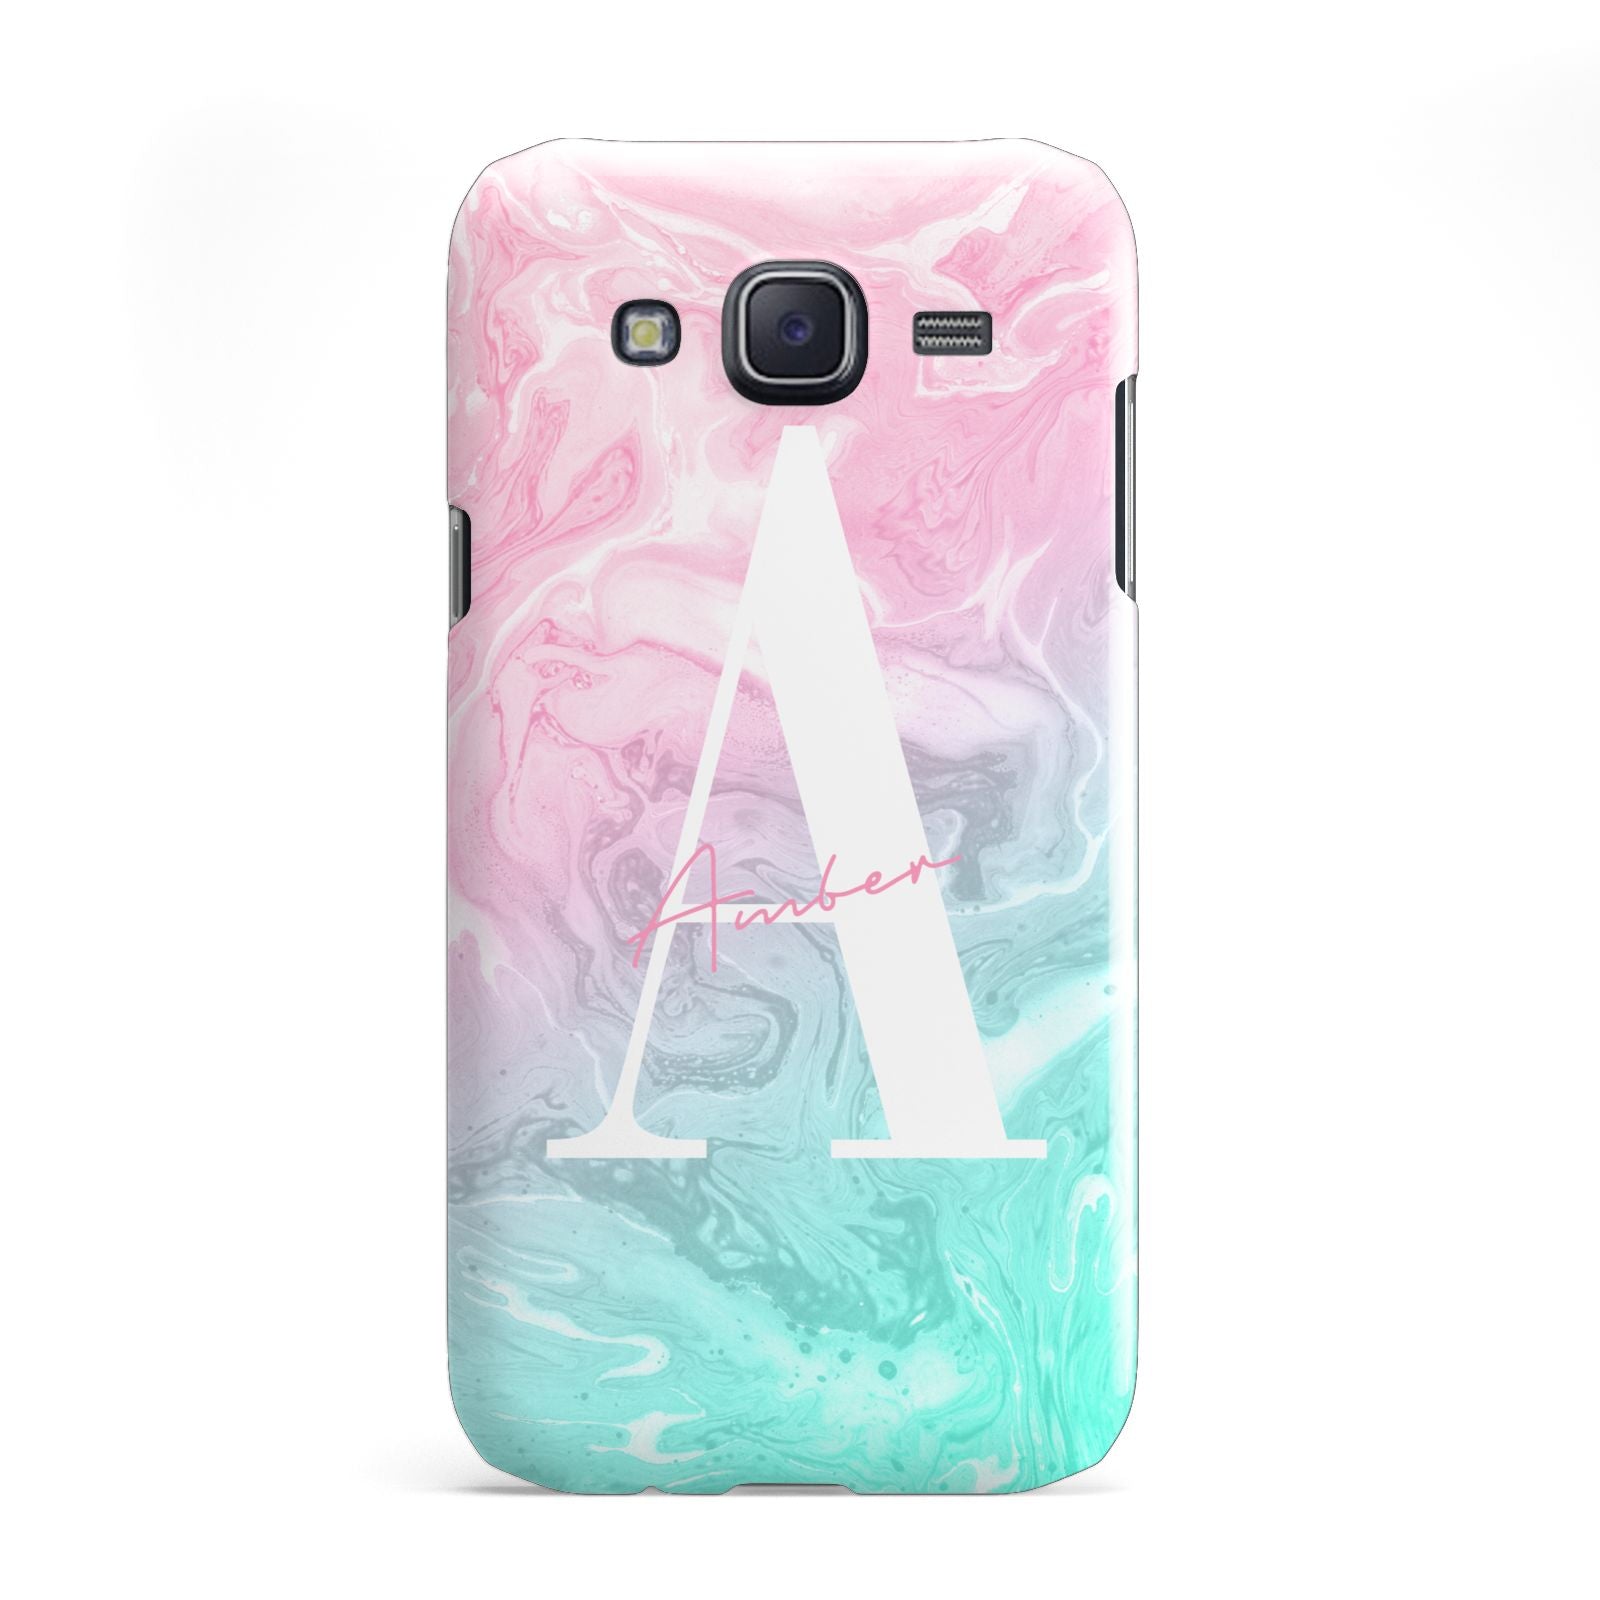 Monogrammed Pink Turquoise Pastel Marble Samsung Galaxy J5 Case